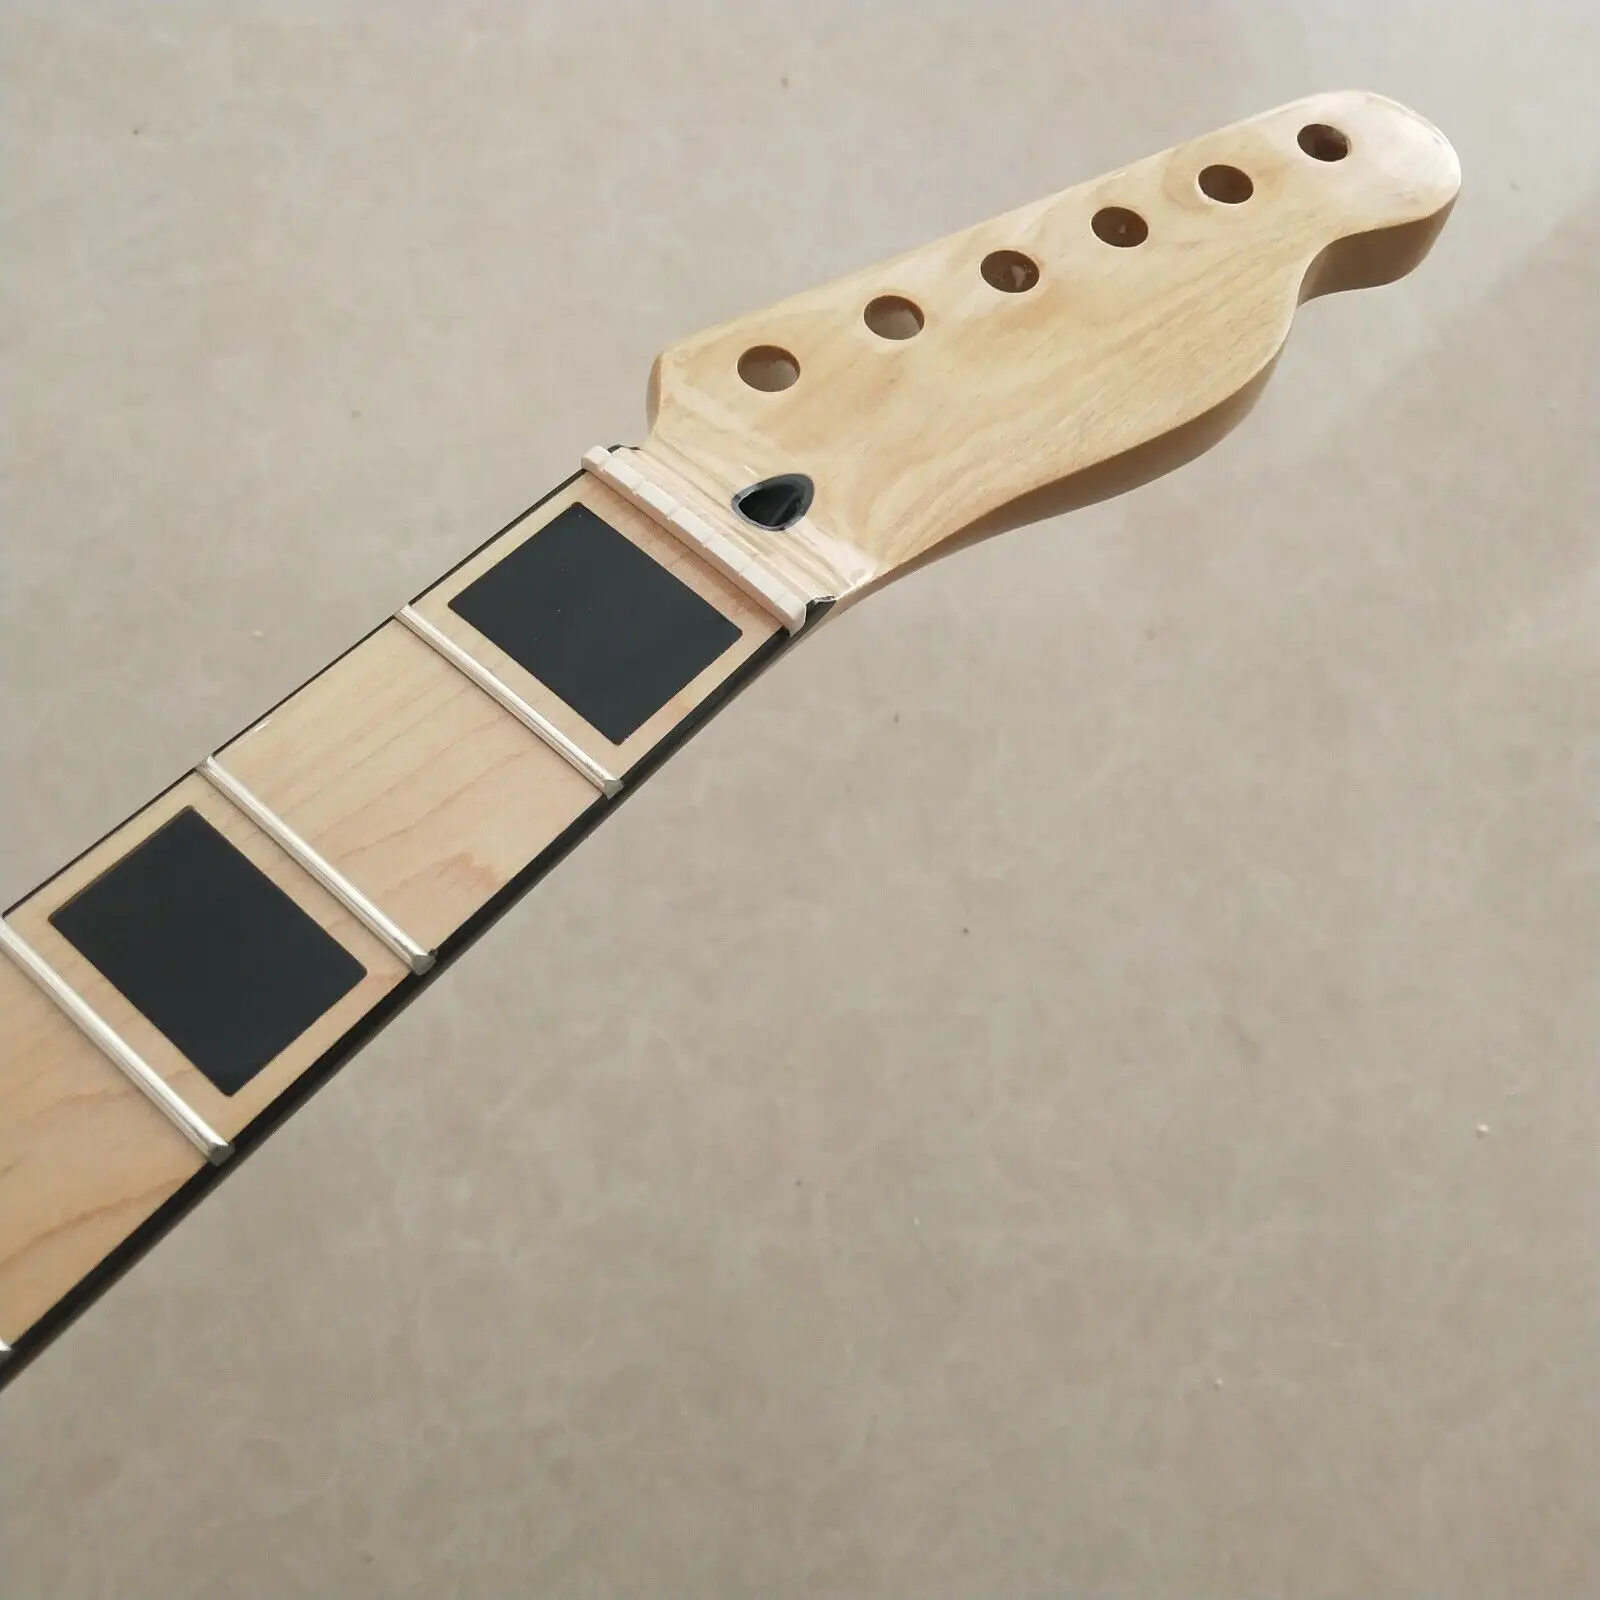 Enlarge High quality Maple Guitar neck 22 fret 25.5in Maple Fretboard Black Block Inlay